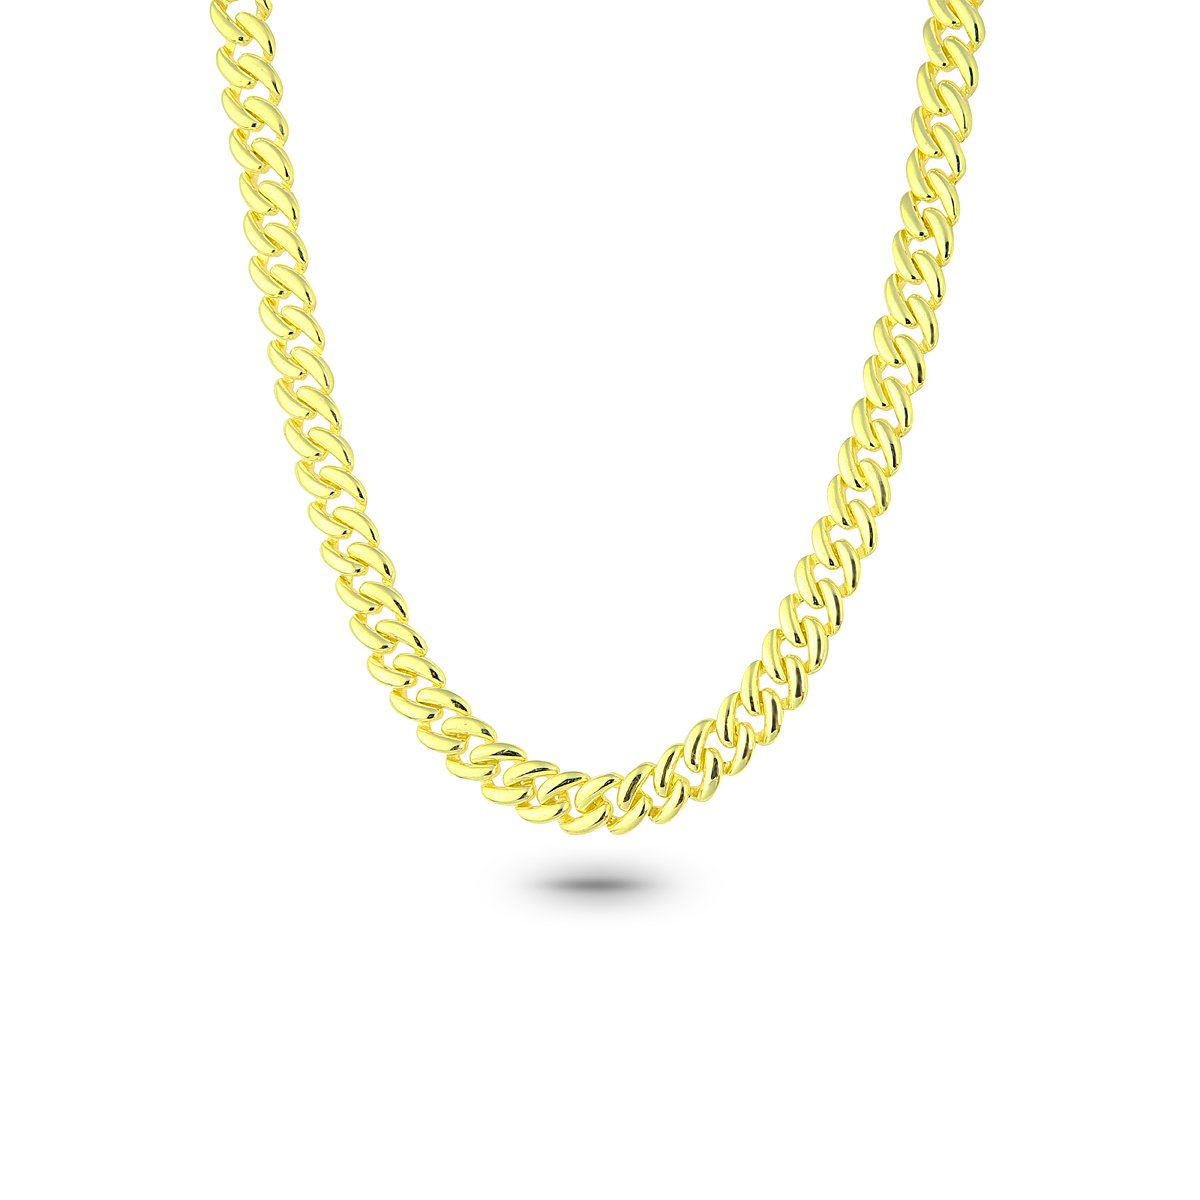 Gold Chain Choker Necklace